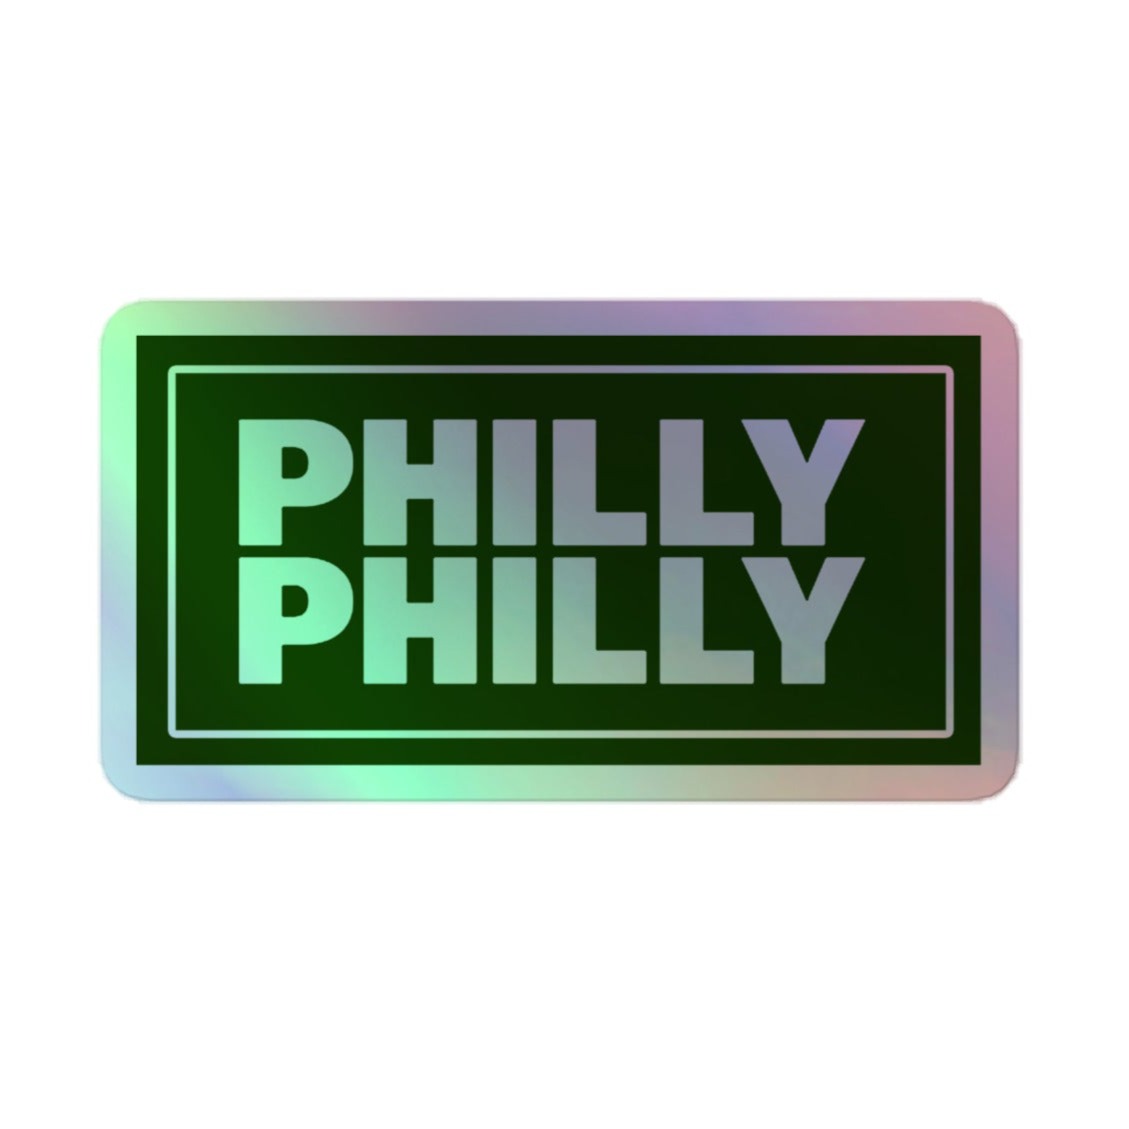 Philly Philly Holographic Sticker